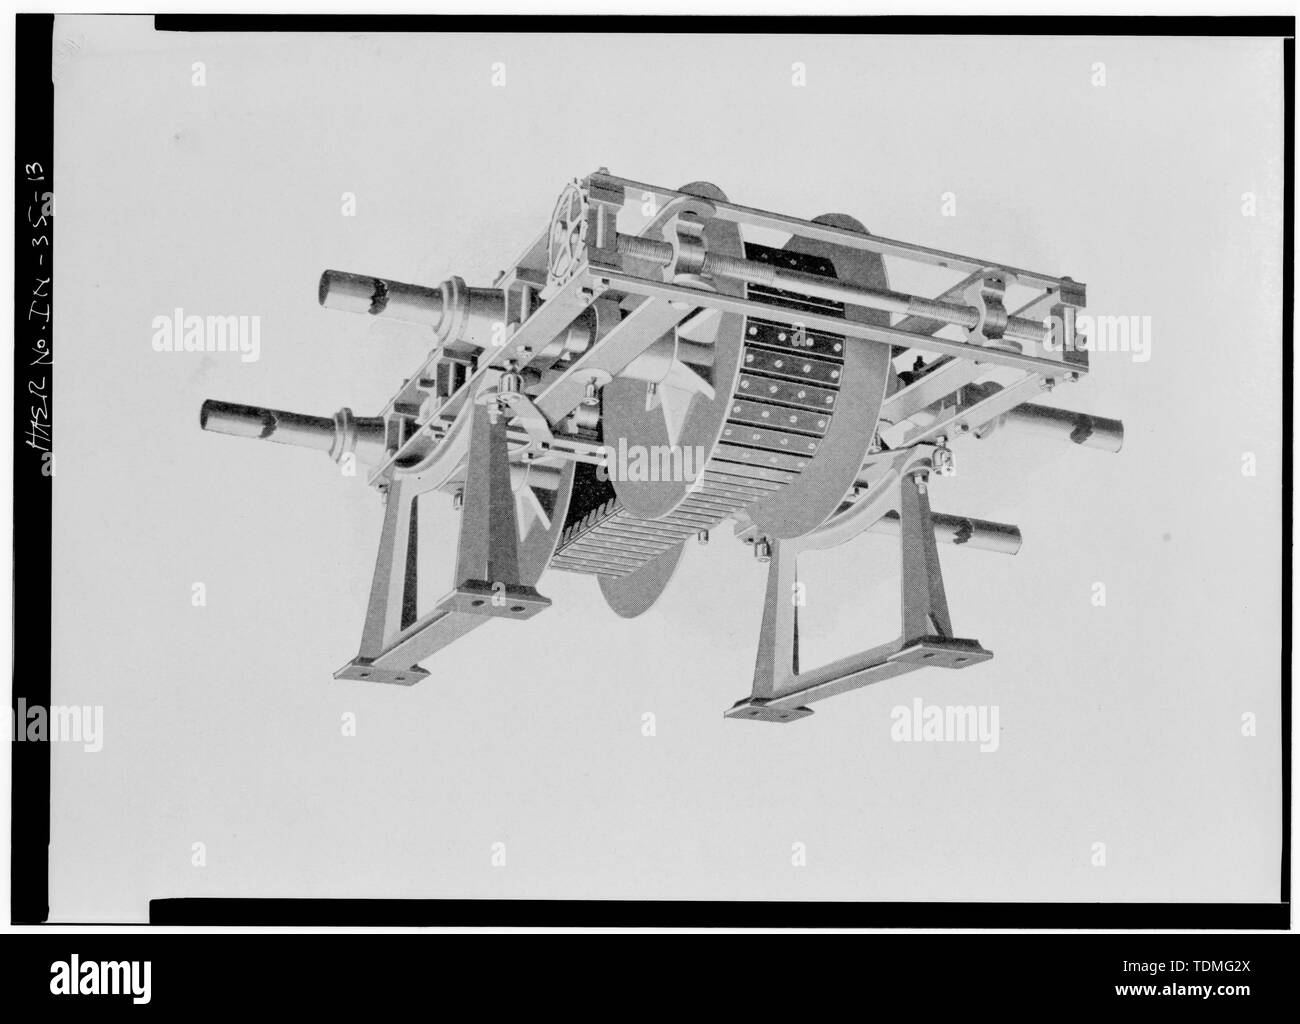 PHOTOCOPY OF PHOTO OF REEVES CLUTCH AND BELT POWER TRANSMISSION SYSTEM - Buckeye Manufacturing Company, Columbia Avenue, Anderson, Madison County, IN; Lambert Brothers Manufacturing Company; Lambert, John William; Boucher, Jack E; Sackheim, Donald; Rosenberg, Robert Stock Photo